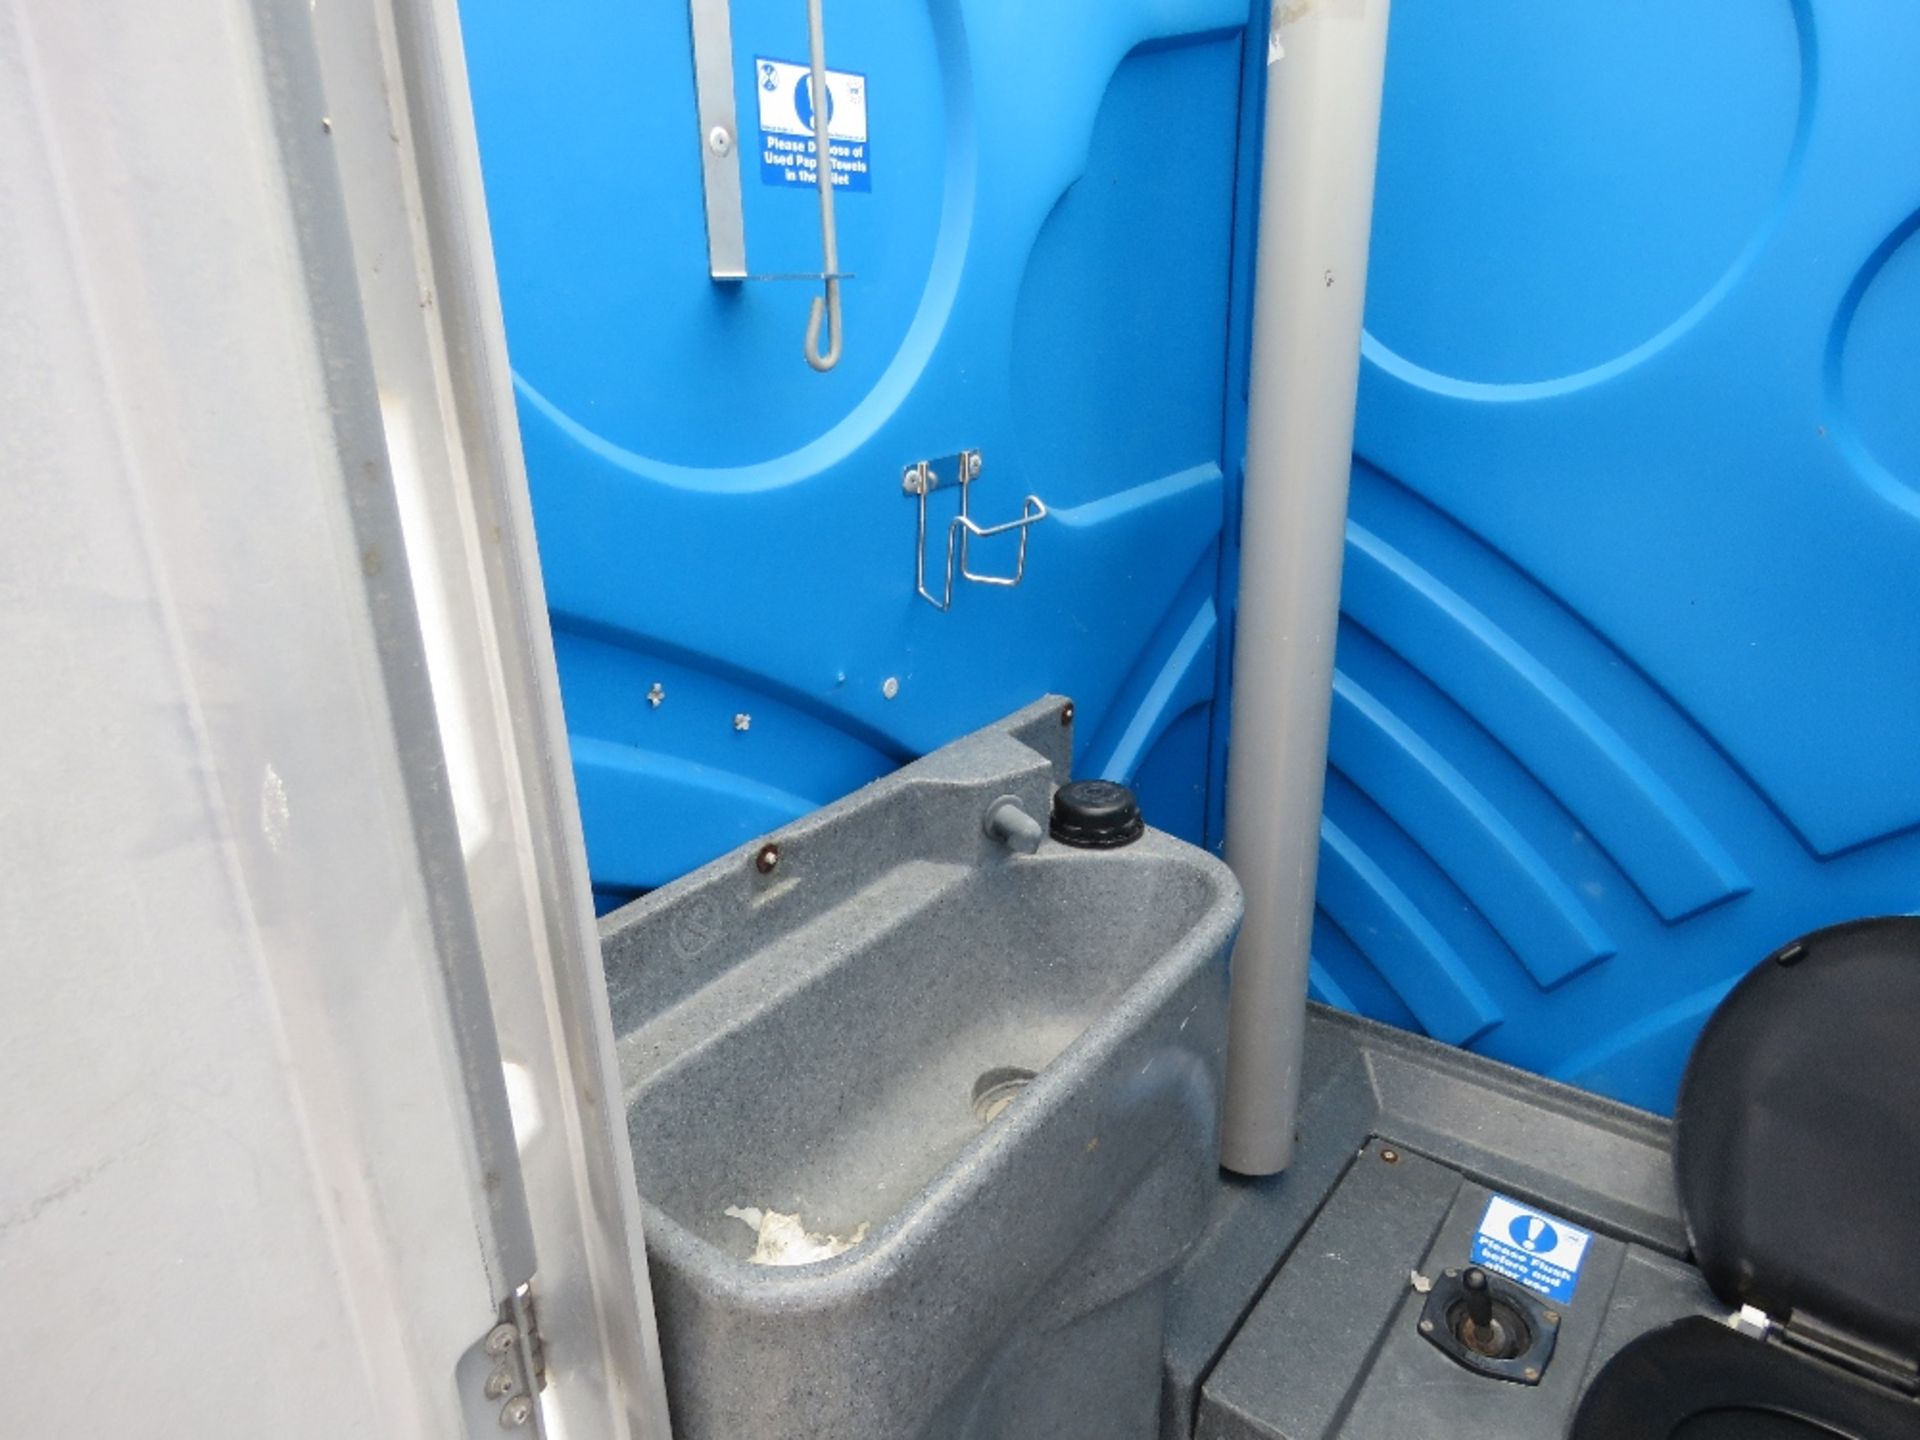 PORTABLE SITE / EVENTS TOILET, DIRECT FROM EVENTS COMPANY DUE TO ONGOING REPLACEMENT PRGRAMME. - Image 4 of 4